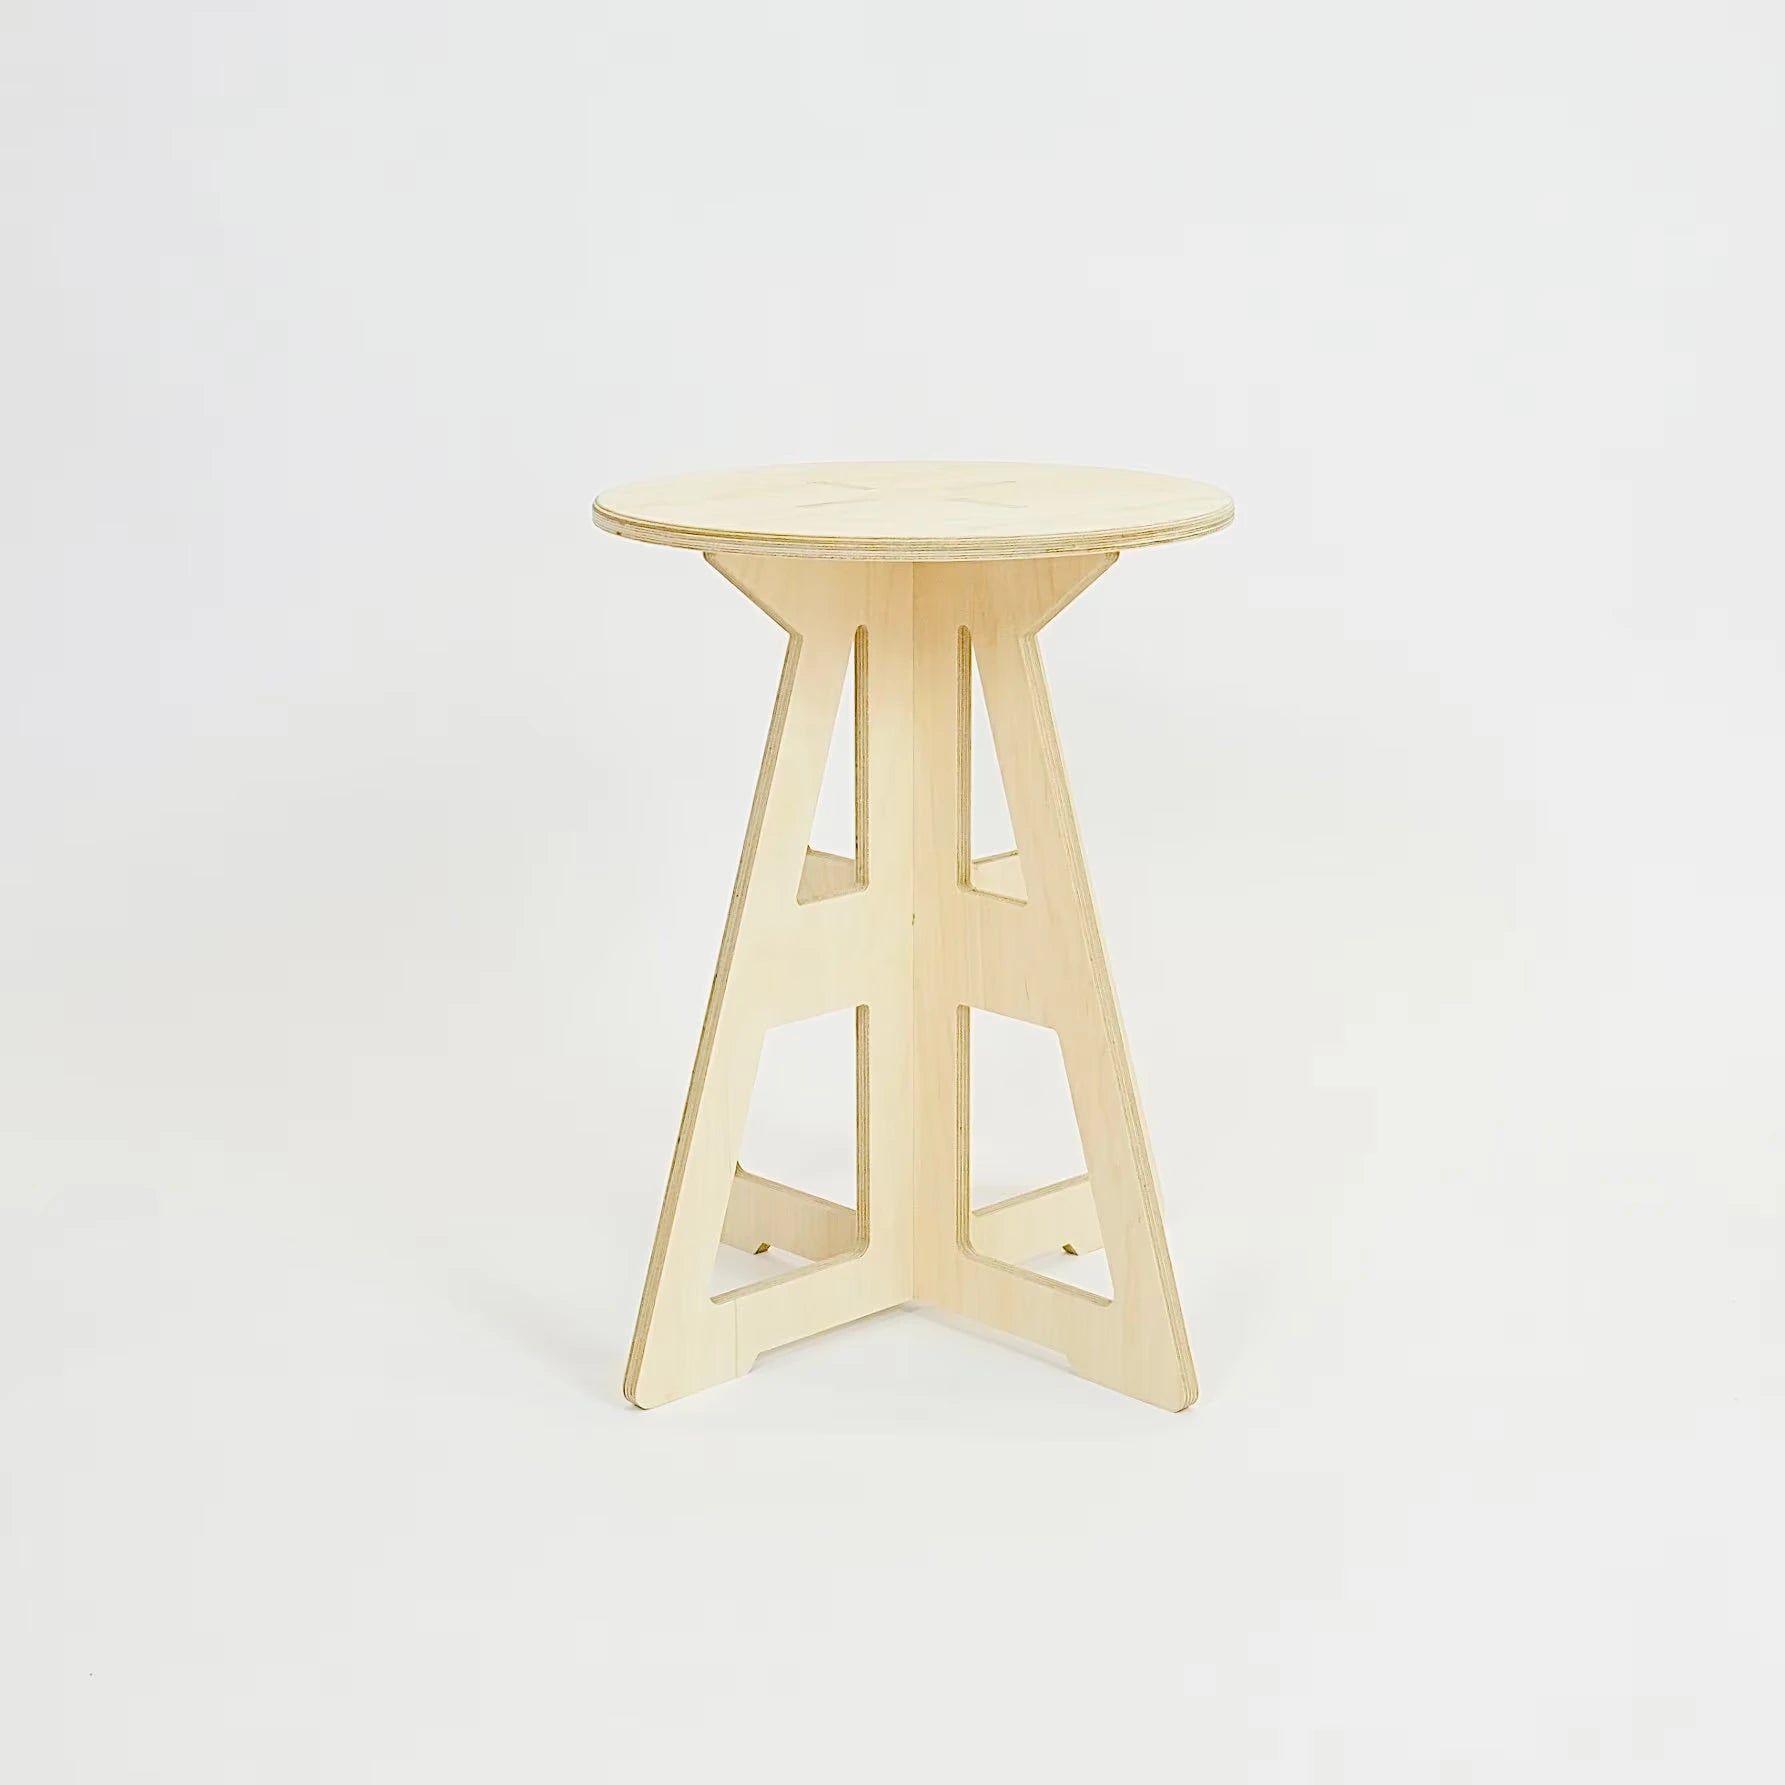 A simple modern pale wooden small stool. It has a round top and triangle legs which are slotted together in a cross shape, the base is wider than the top. The top also feature four grooves where the legs slot into the top.